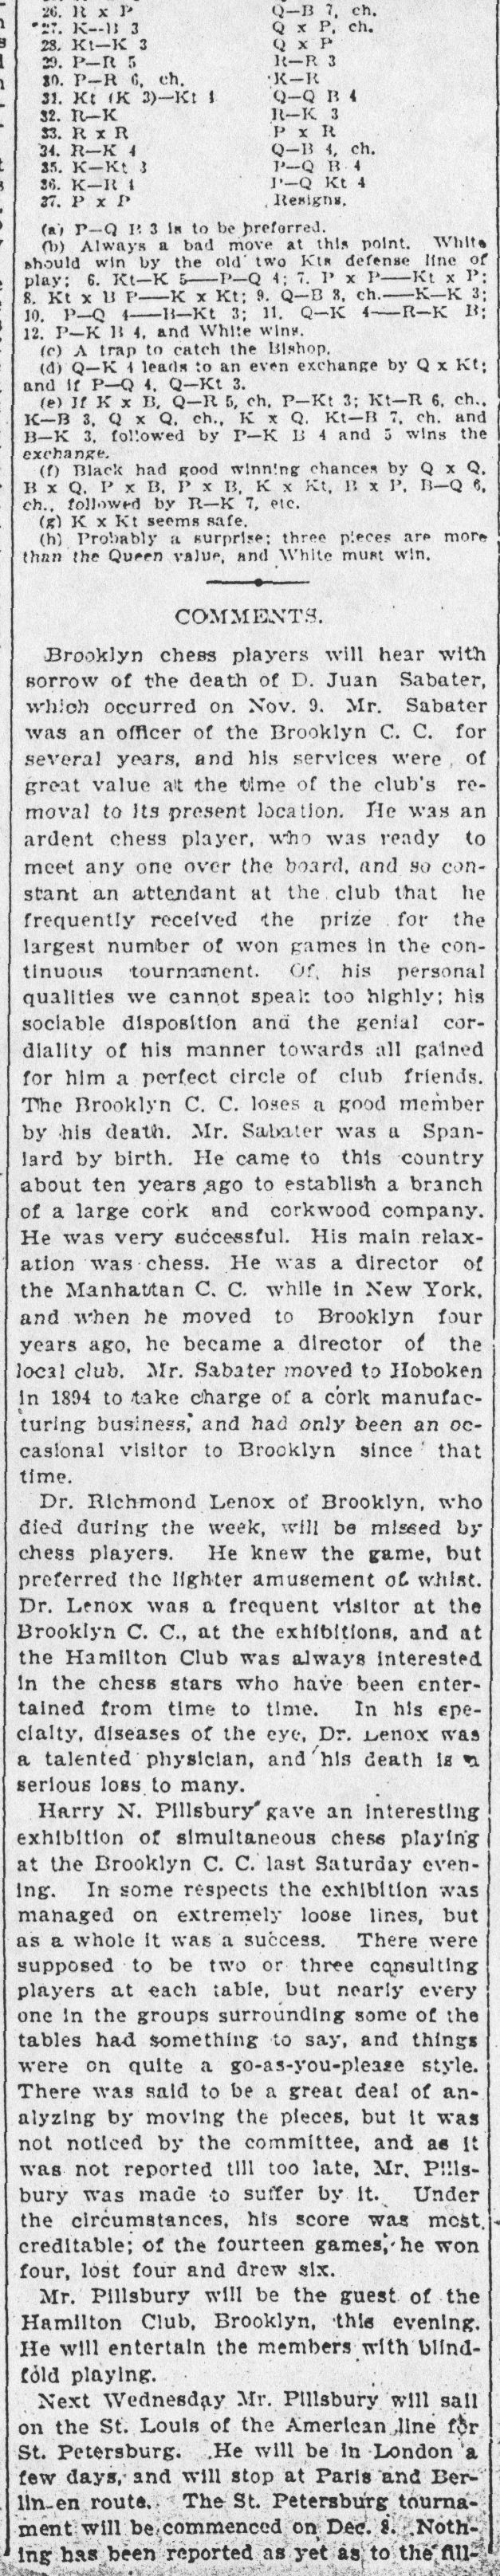 1895.11.16-02 Brooklyn Daily Standard-Union.png